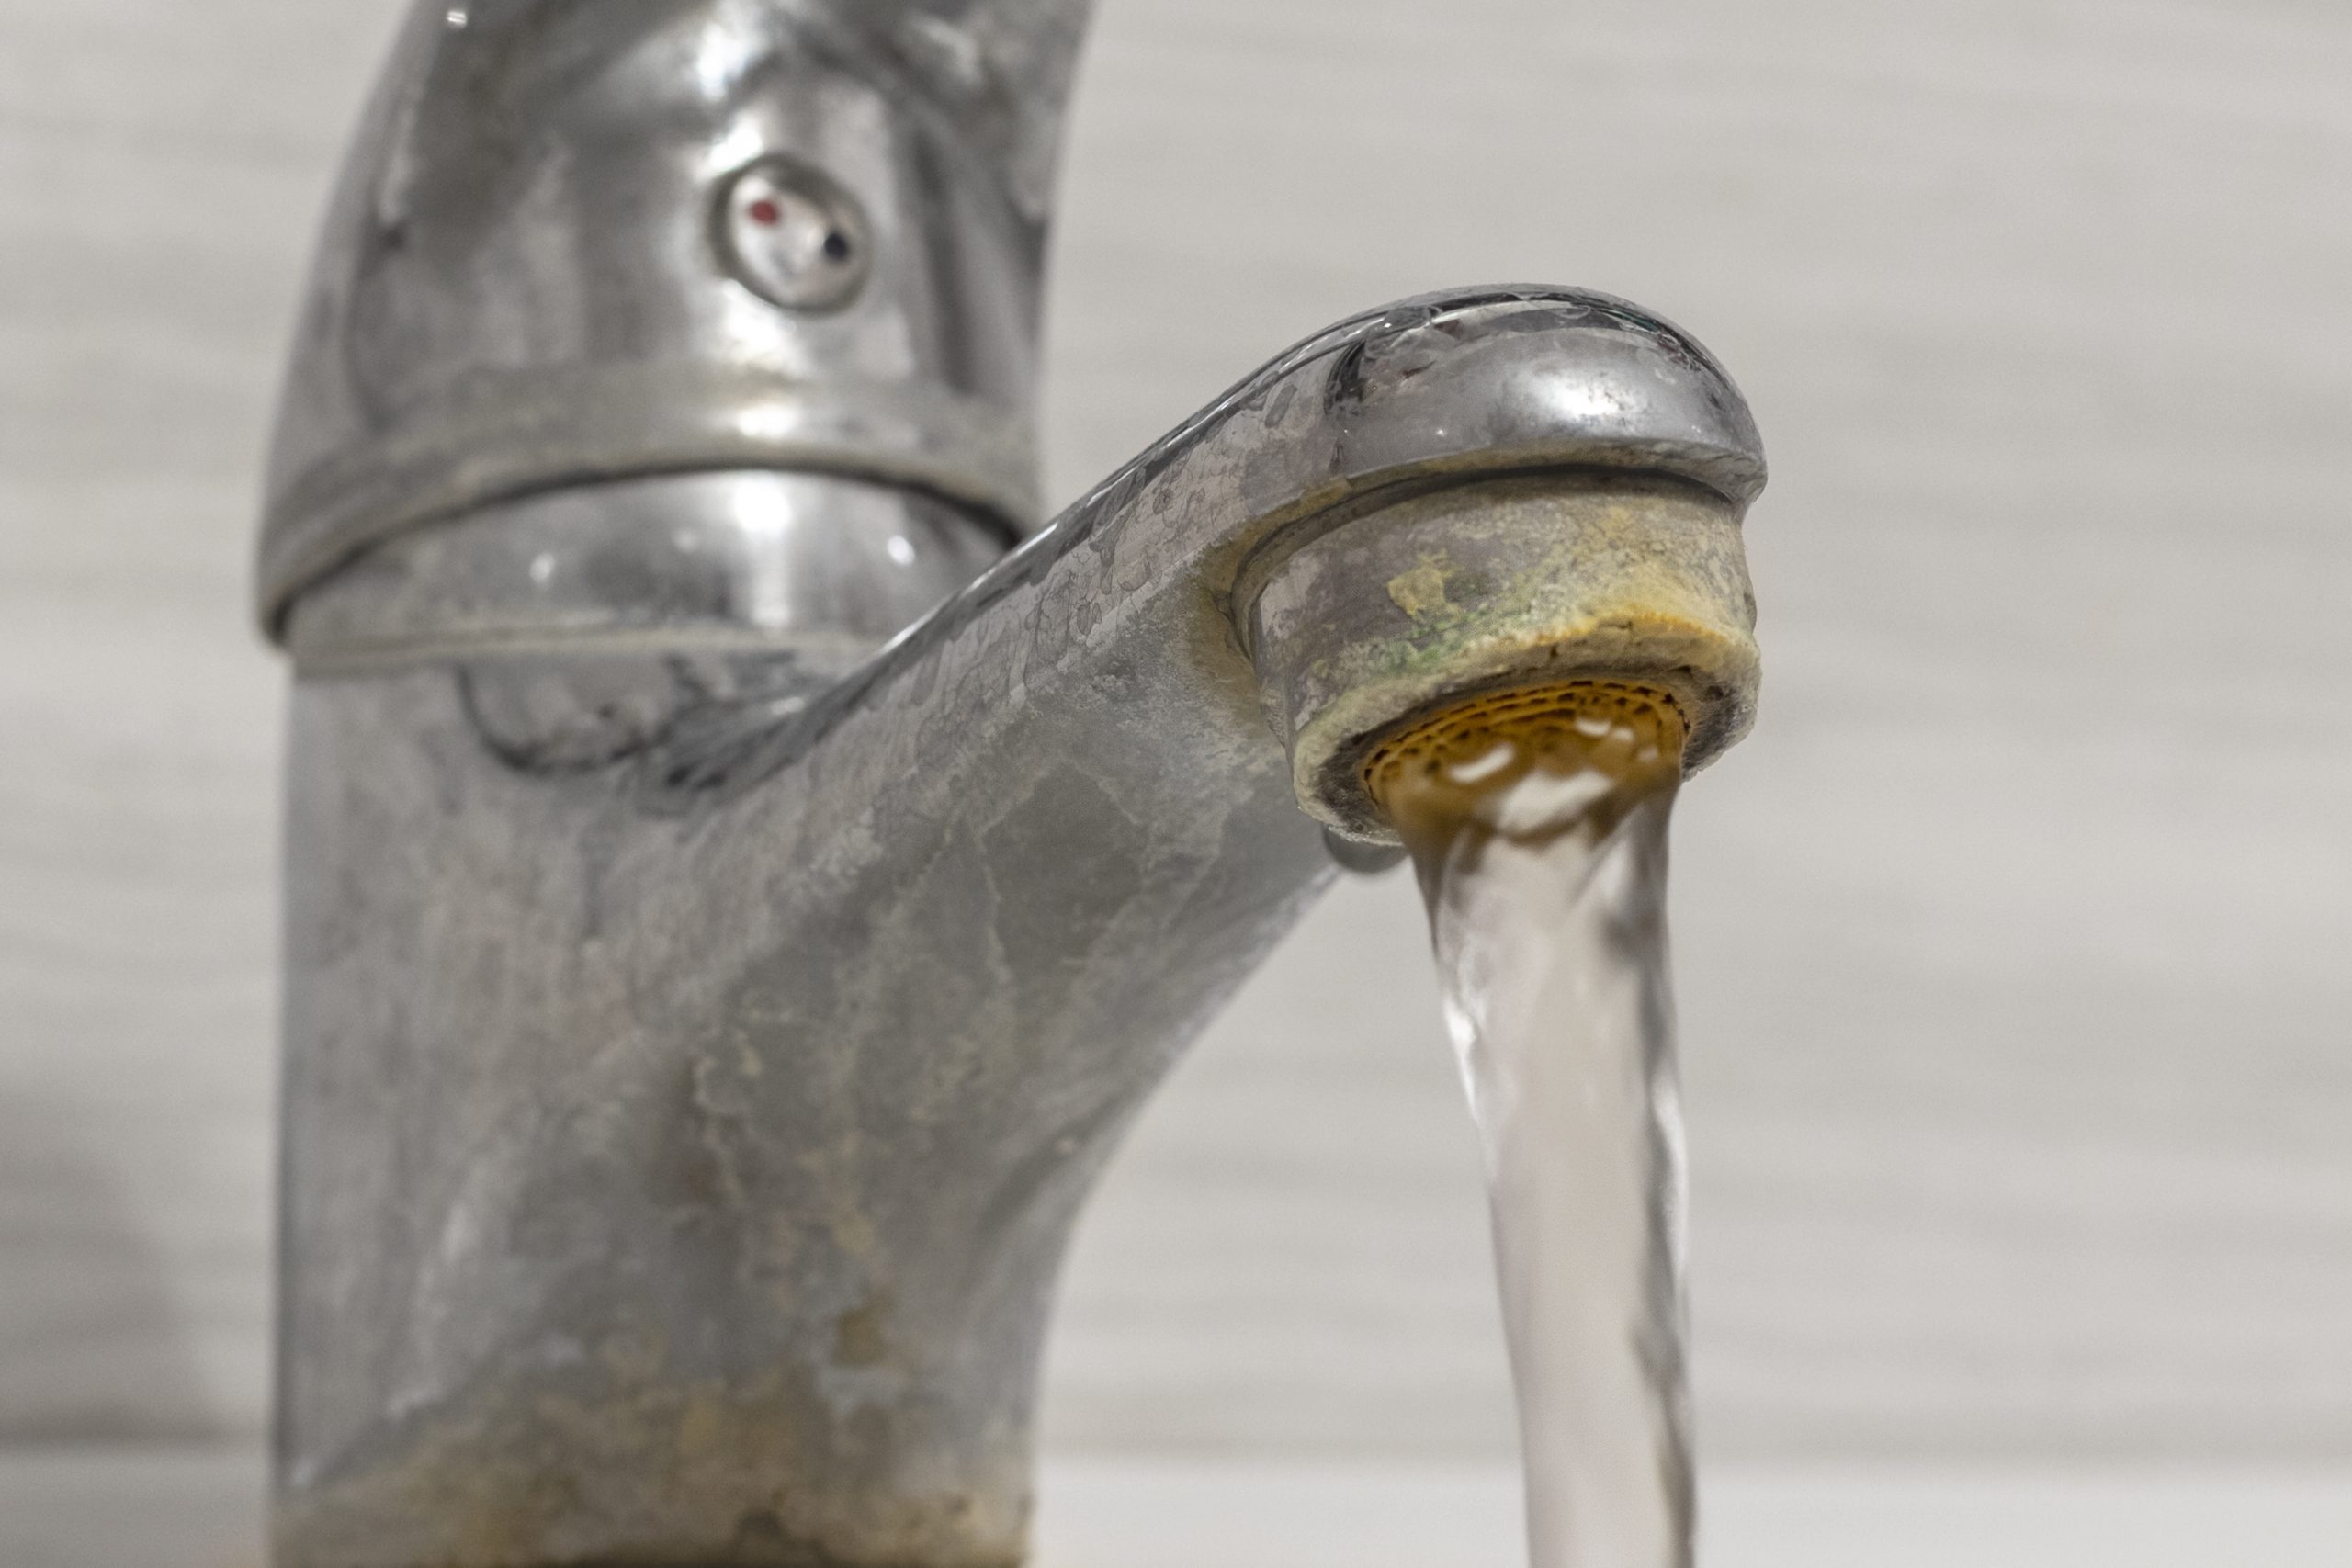 How To Remove Hard Water Stains From Taps: 6 Methods Tested